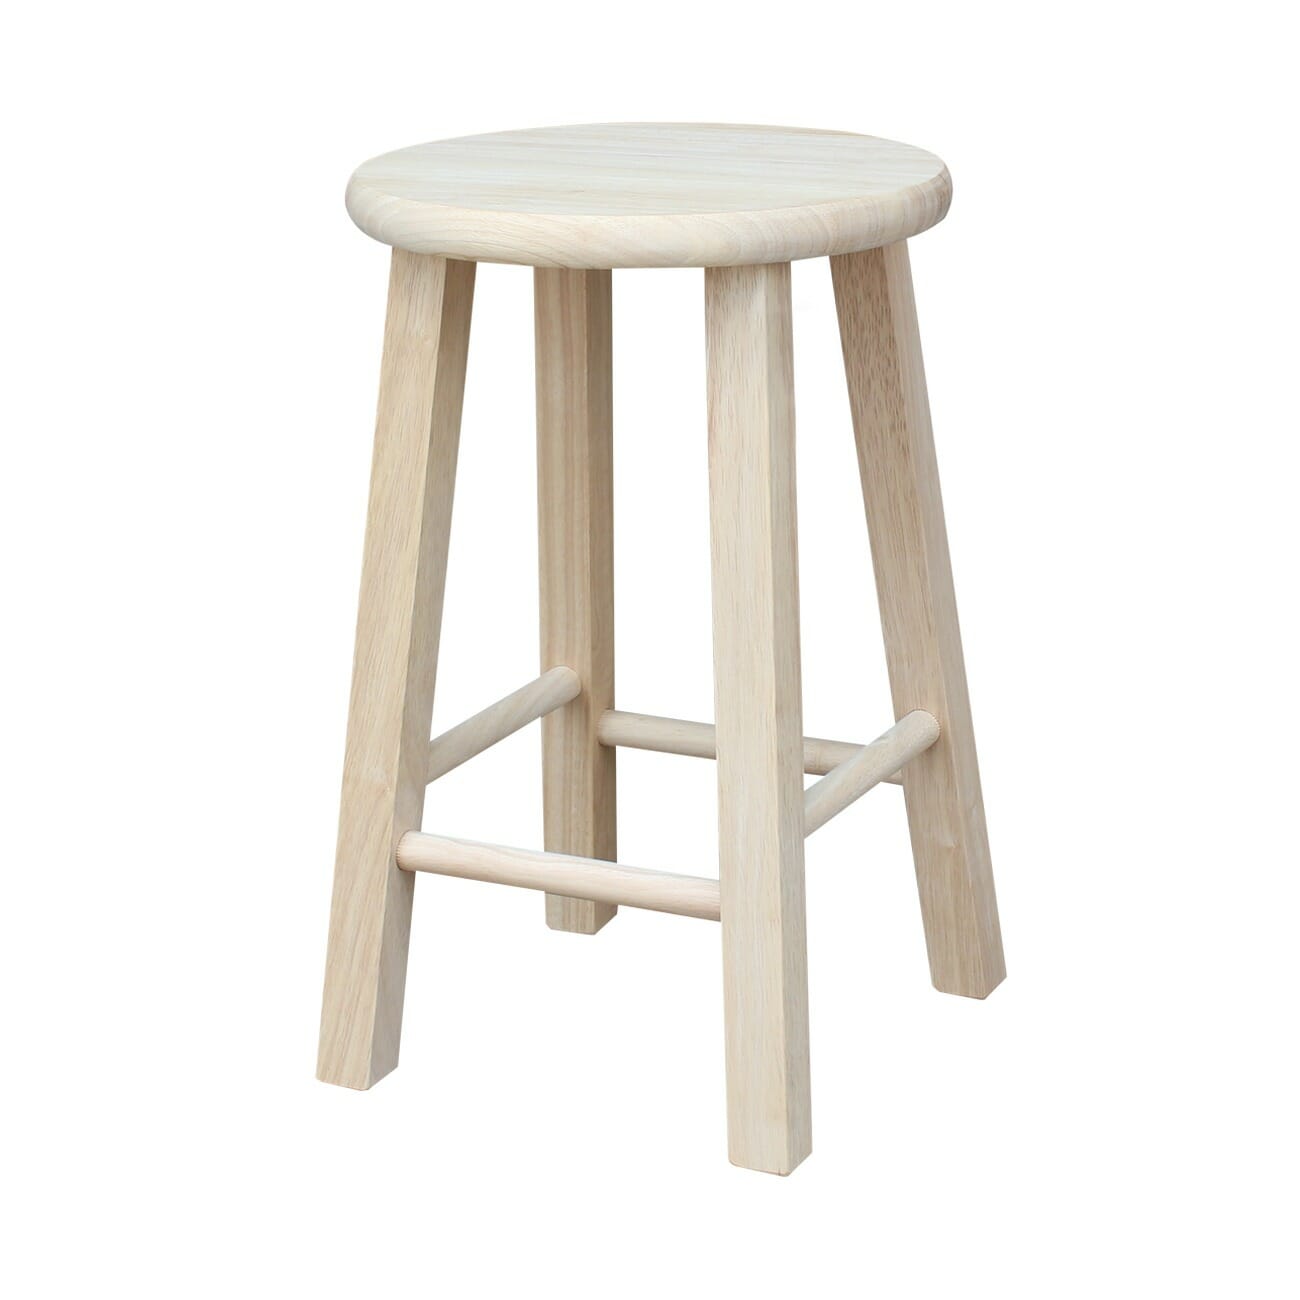 518 18 Inch Tall Round Top Stool, 18 Inch Wooden Bar Stools